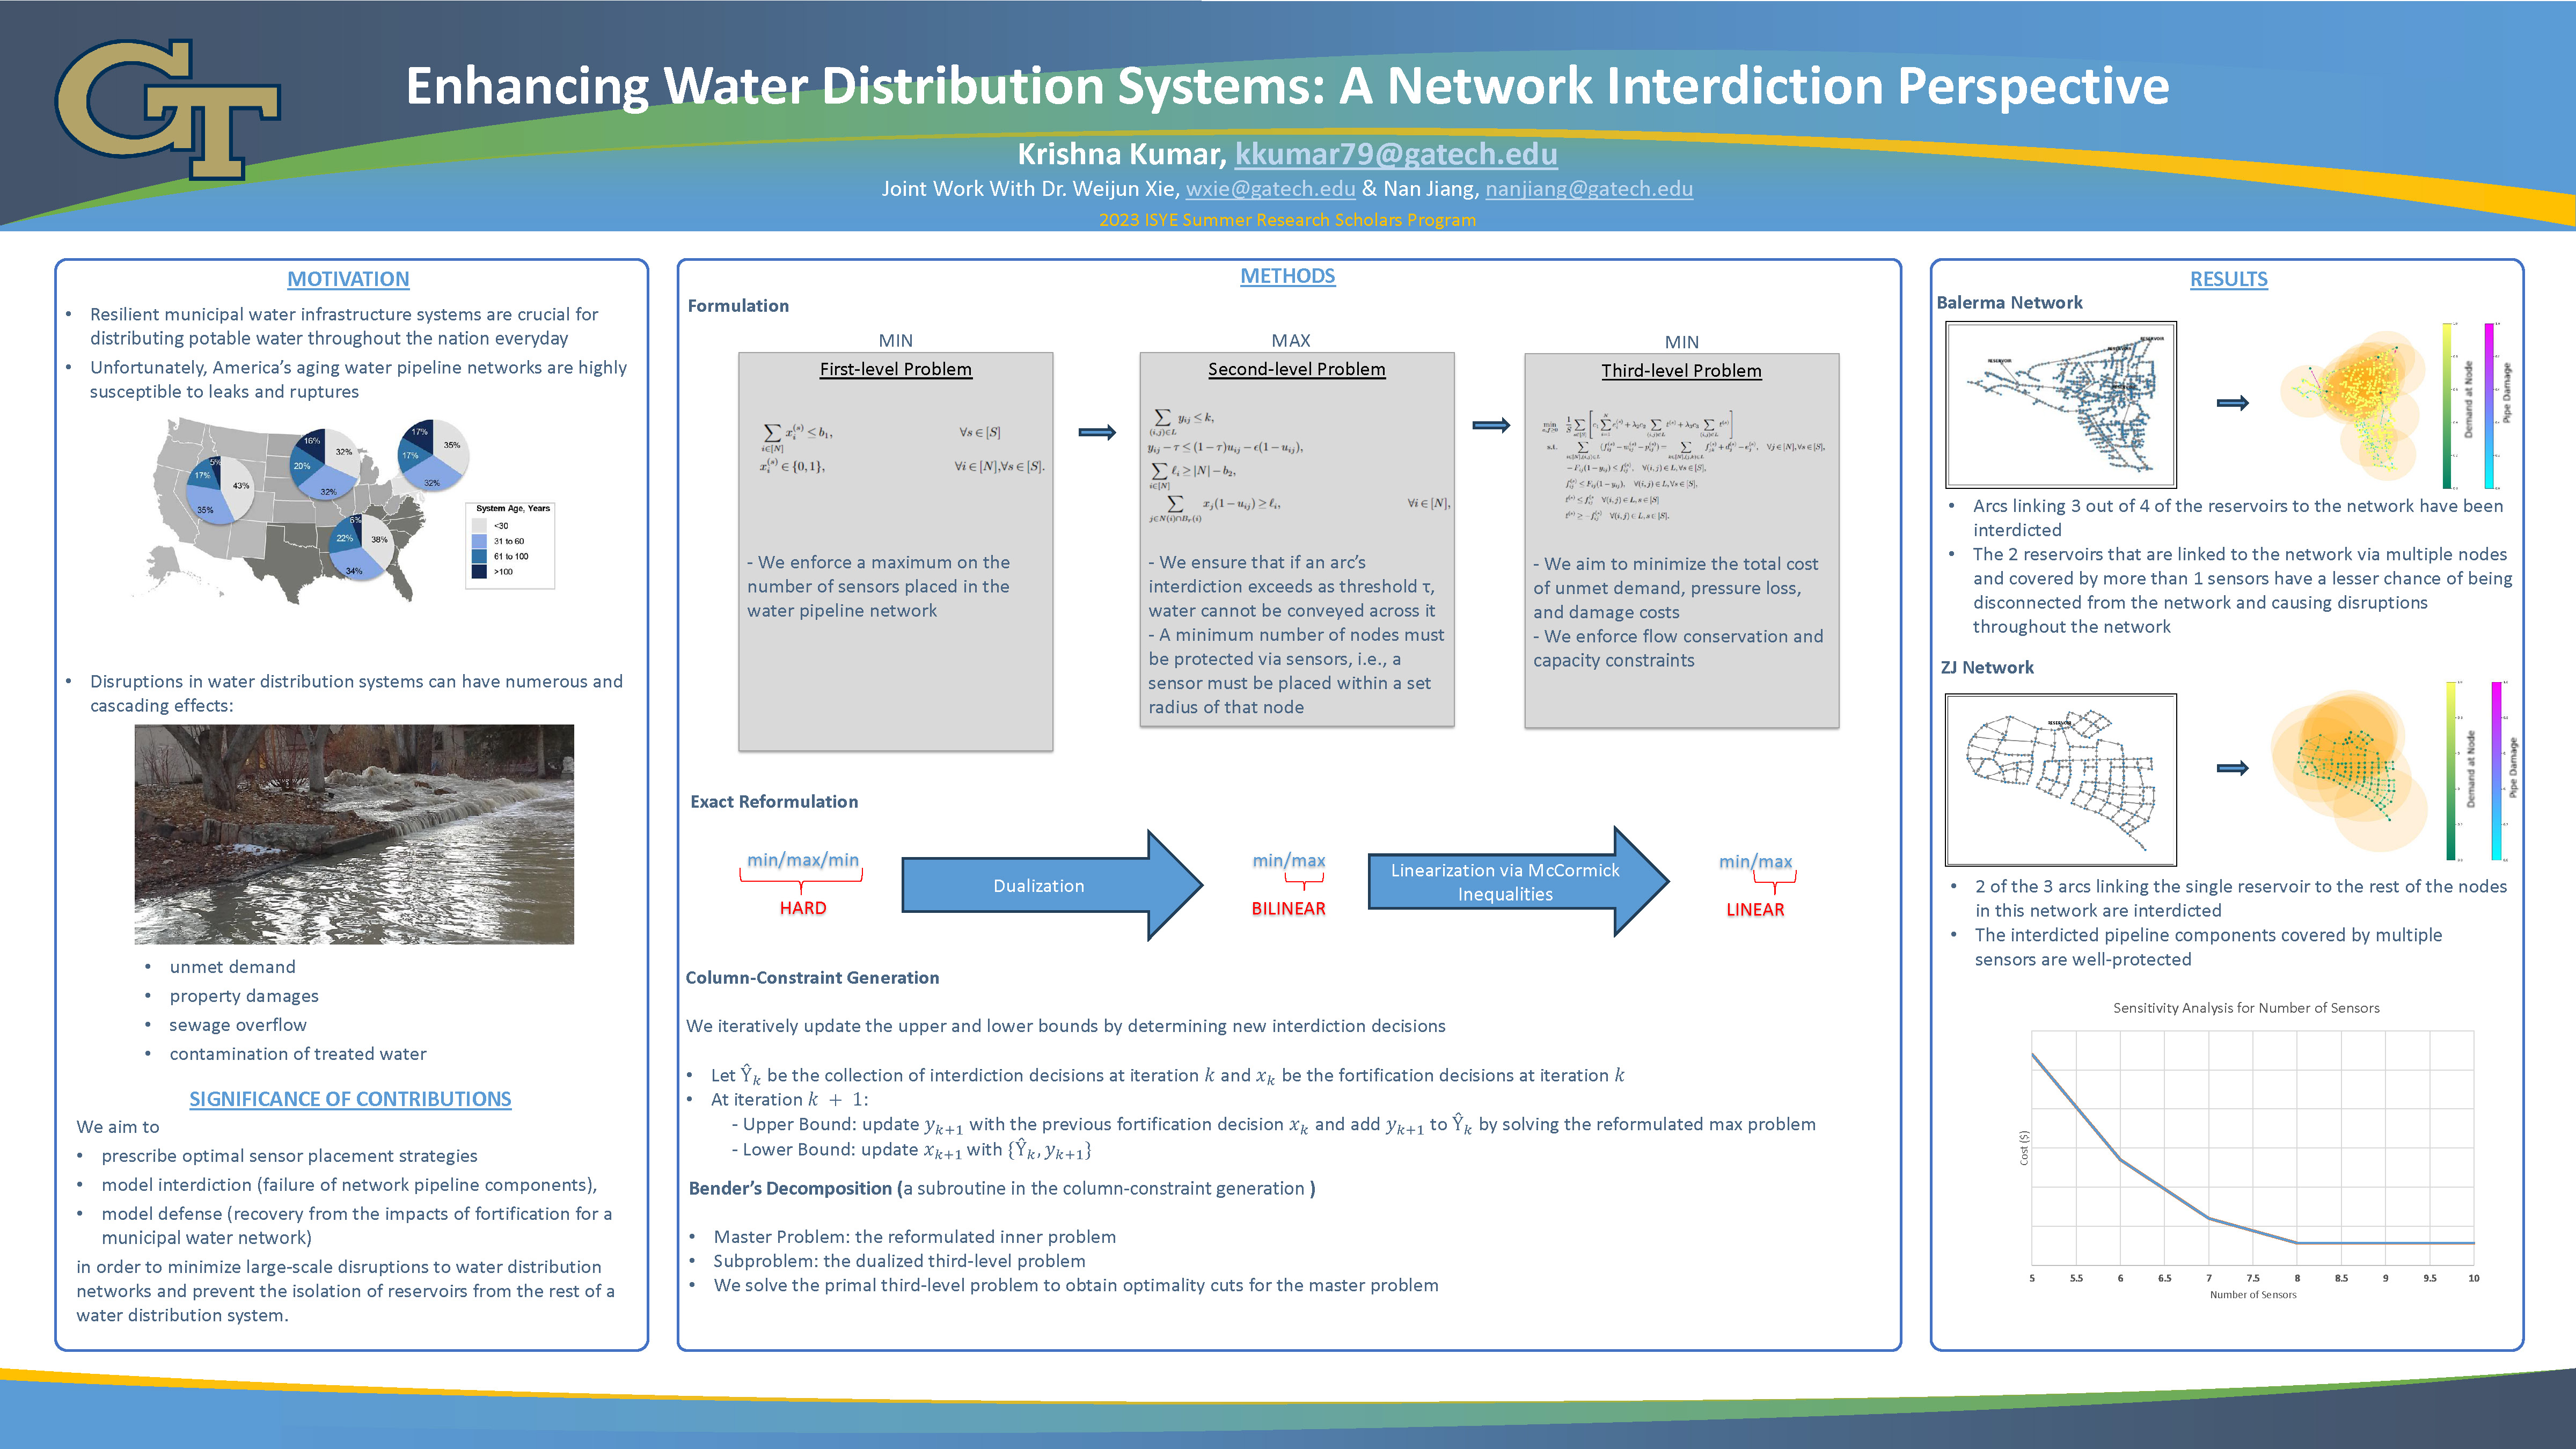 Enhancing Water Distribution Systems: A Network Interdiction Perspective poster